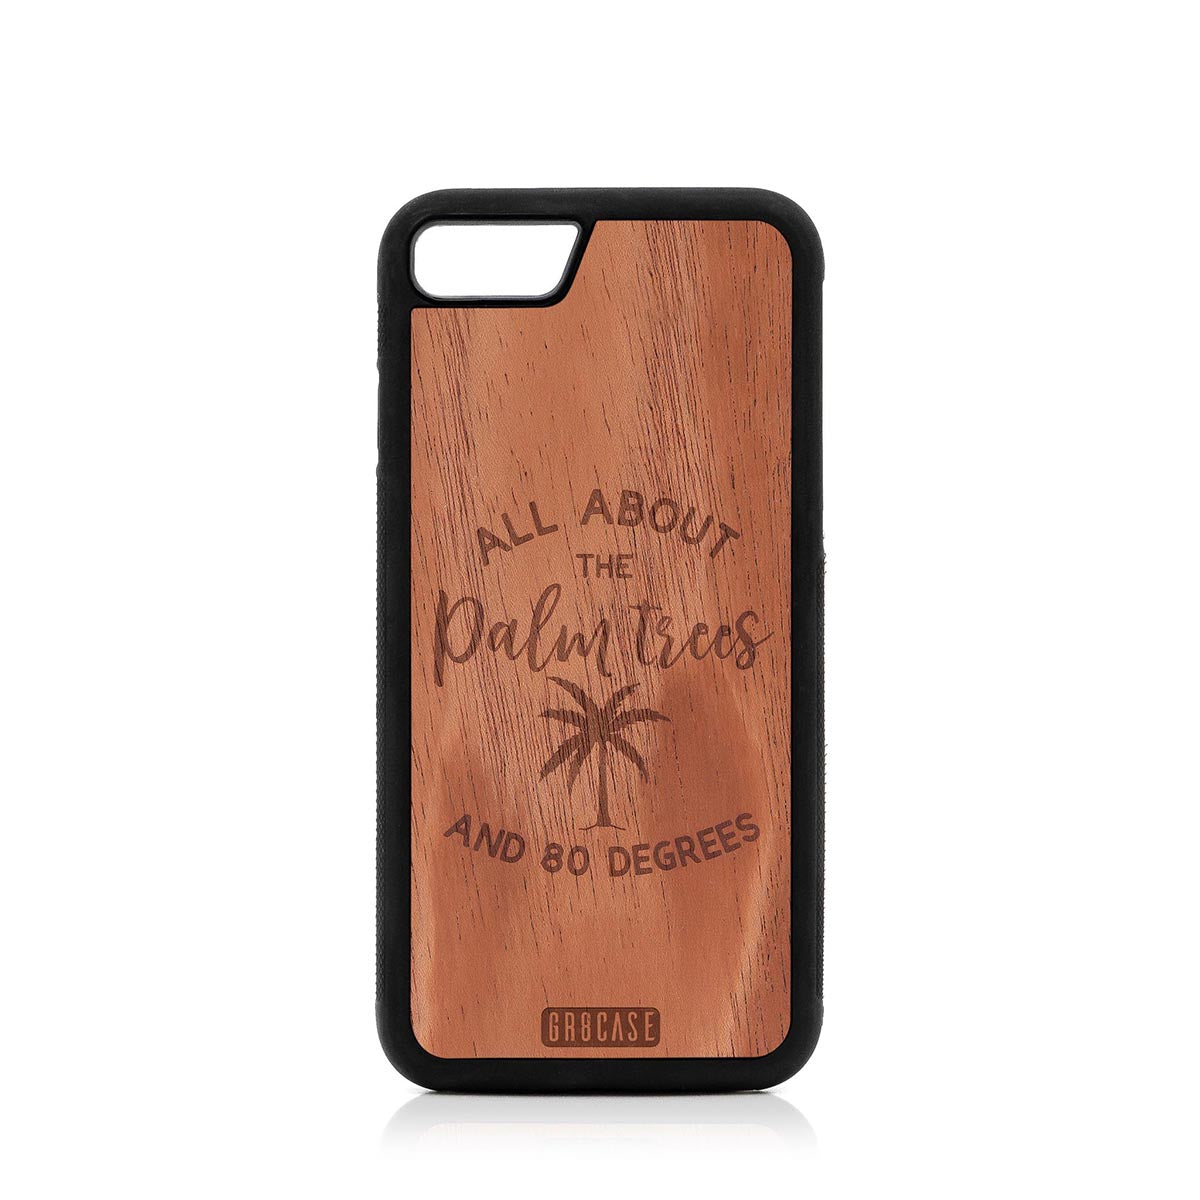 All About The Palm Trees and 80 Degrees Design Wood Case For iPhone 7/8 by GR8CASE